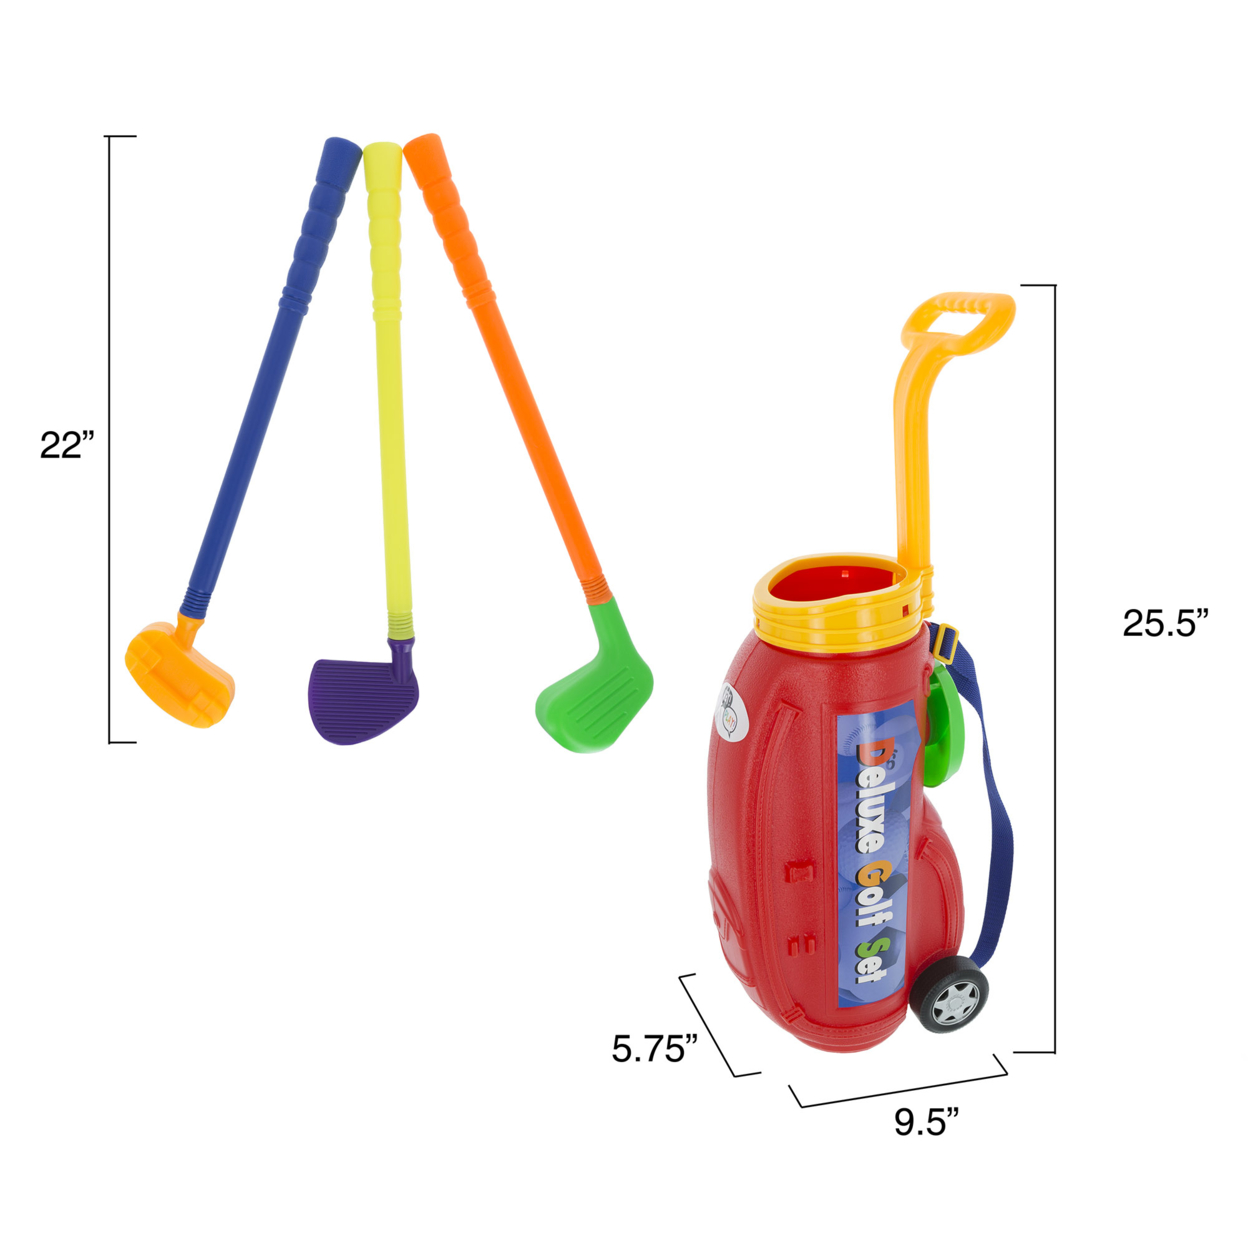 Toddler Toy Golf Club Play Set With Plastic Bag Wheels Clubs Putter Balls